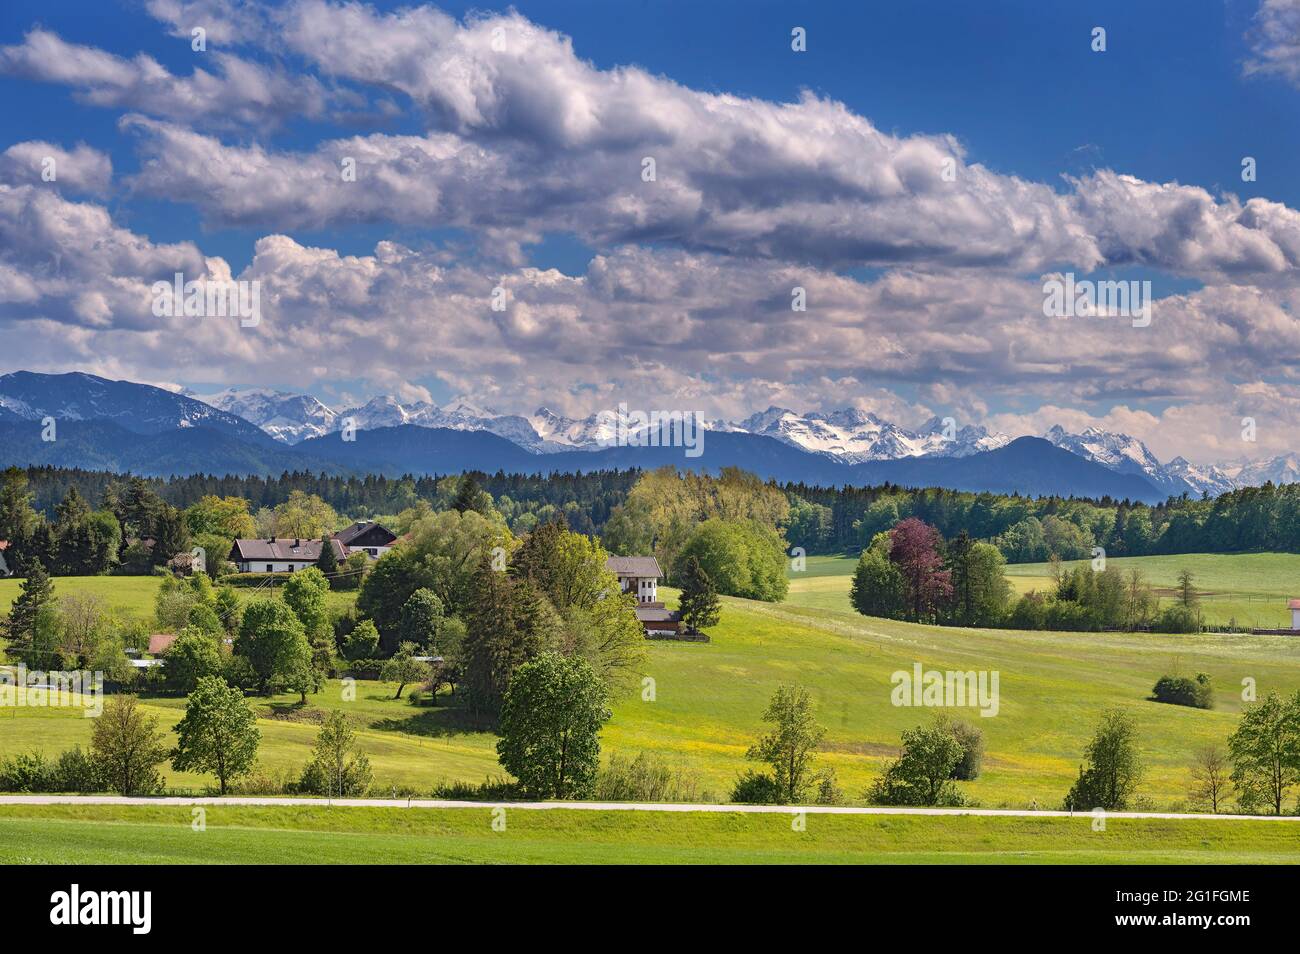 Springlike landscape in the foothills of the Alps with (cumulus) clouds, near Deining, Upper Bavaria, Bavaria, Germany Stock Photo